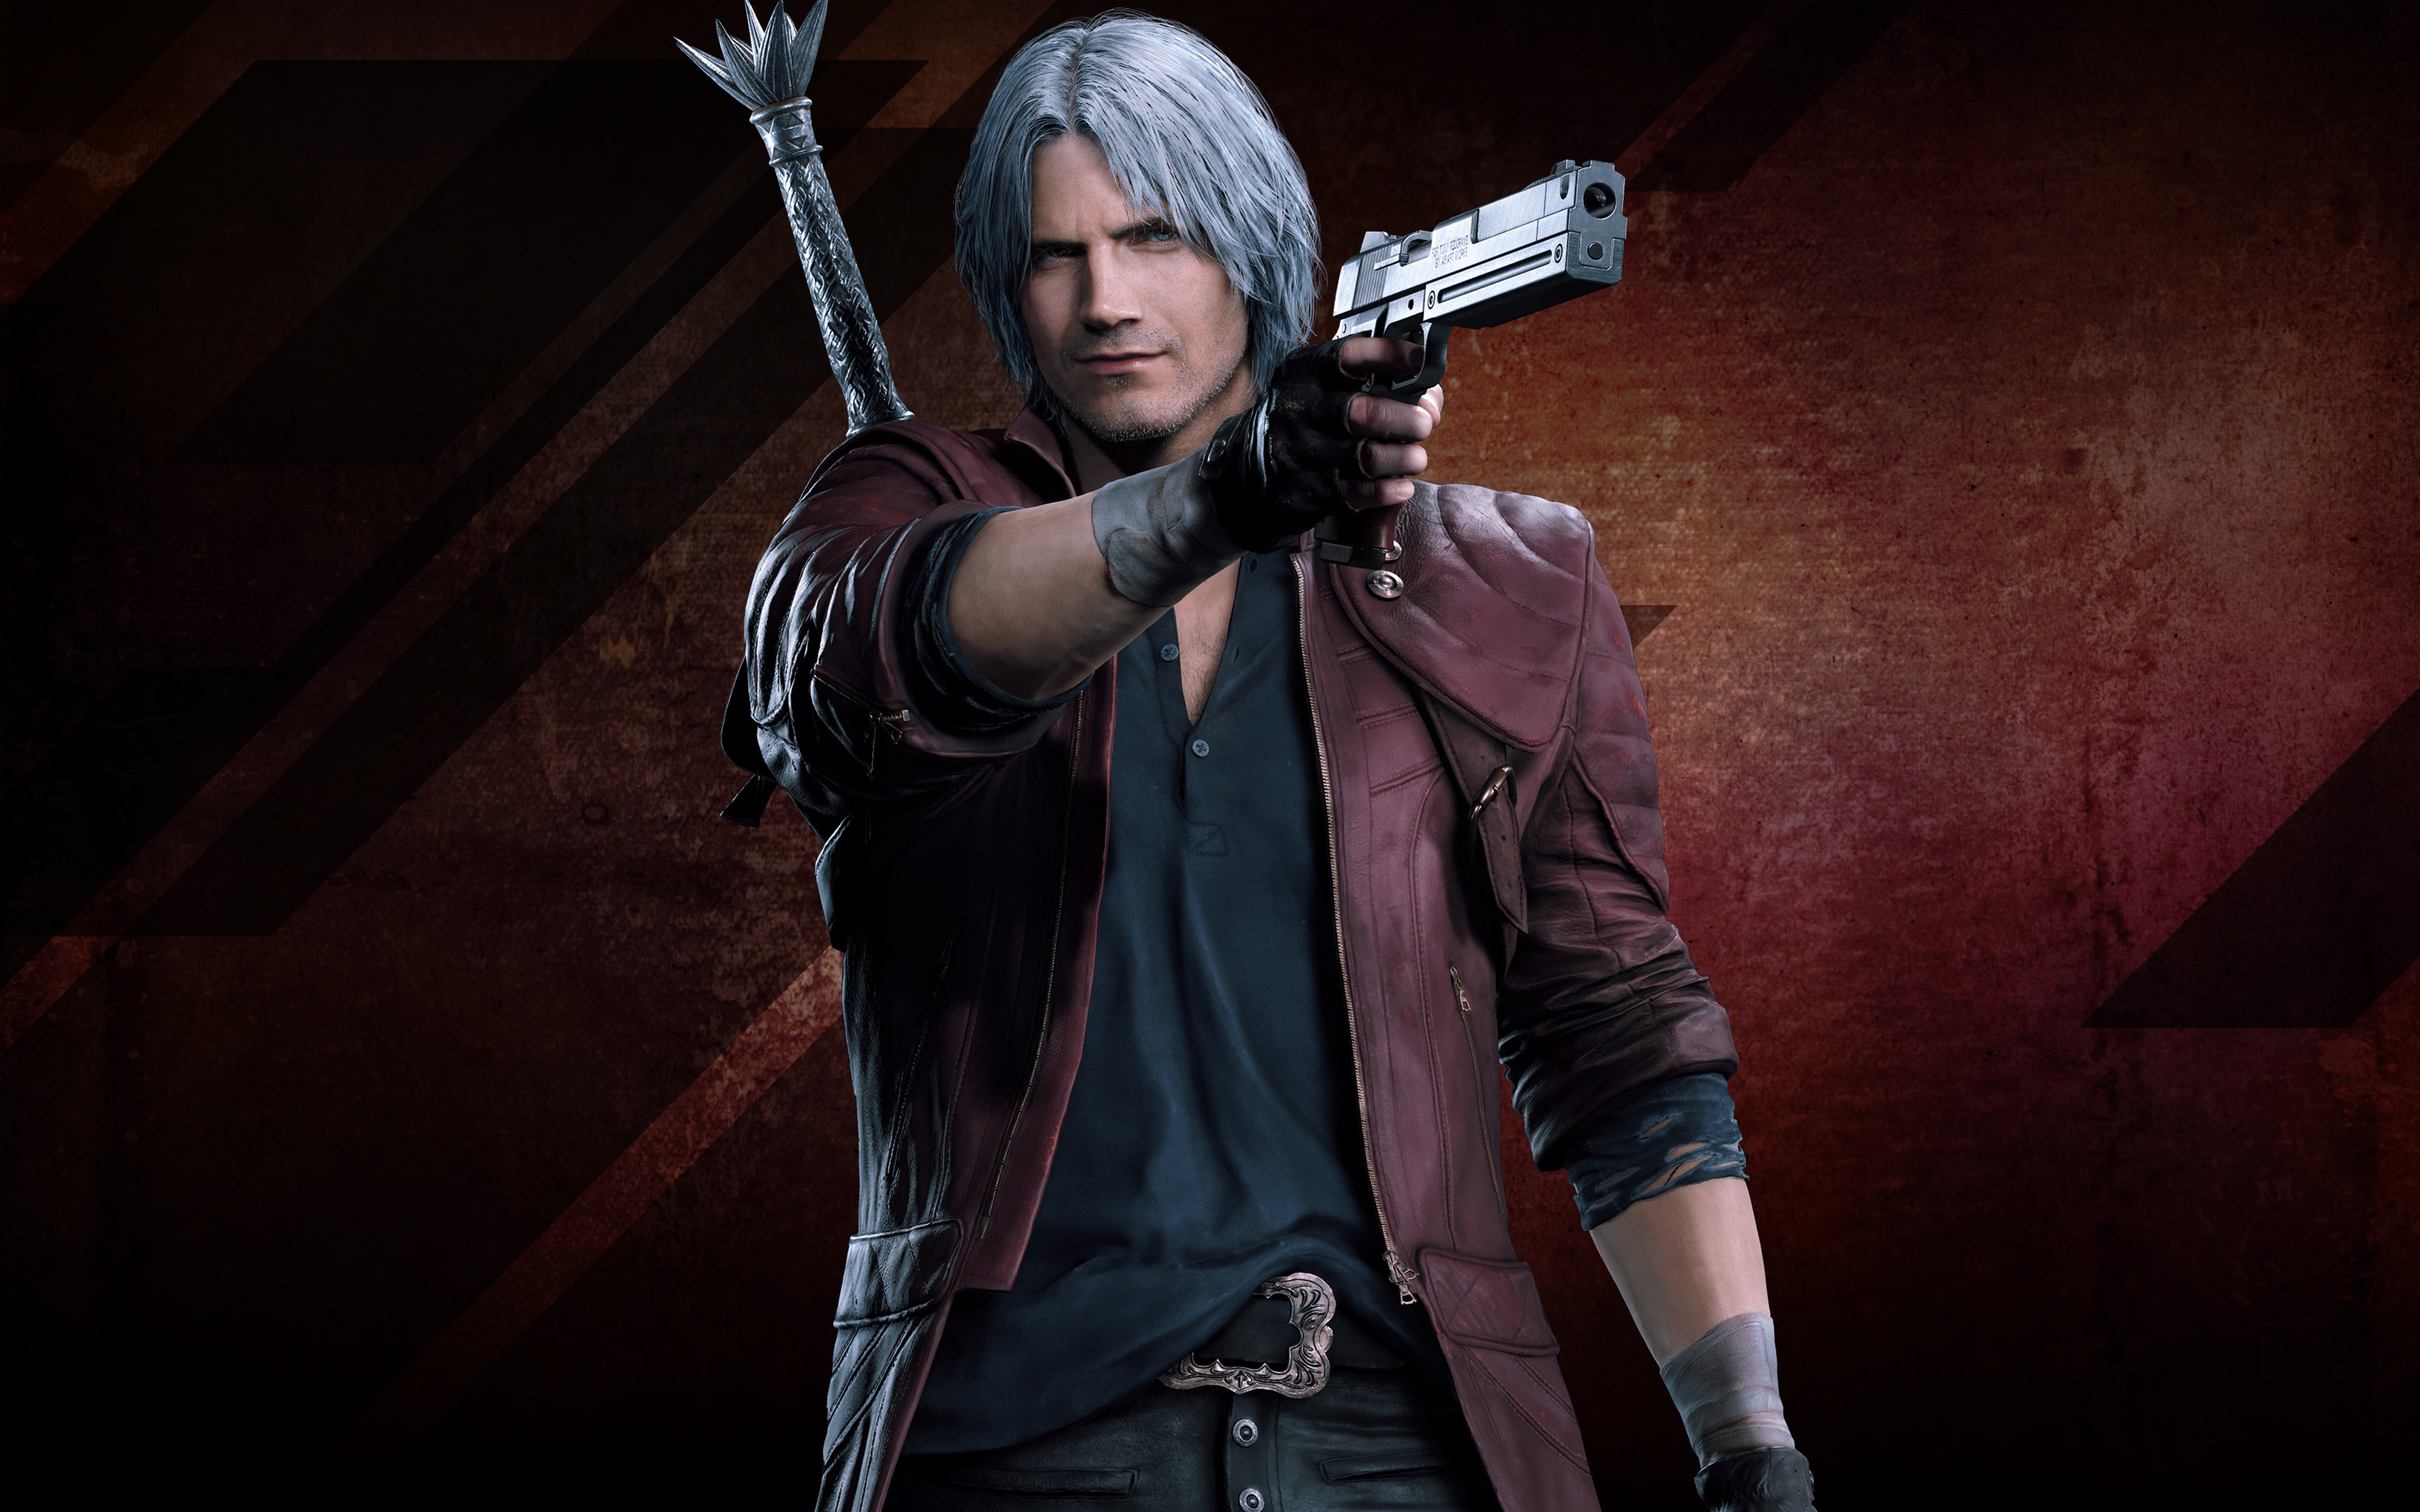 Games devil may cry. Данте Devil May Cry. Данте Devil May Cry 5. Данте из Devil May Cry. Devil May Cry 4 Данте.